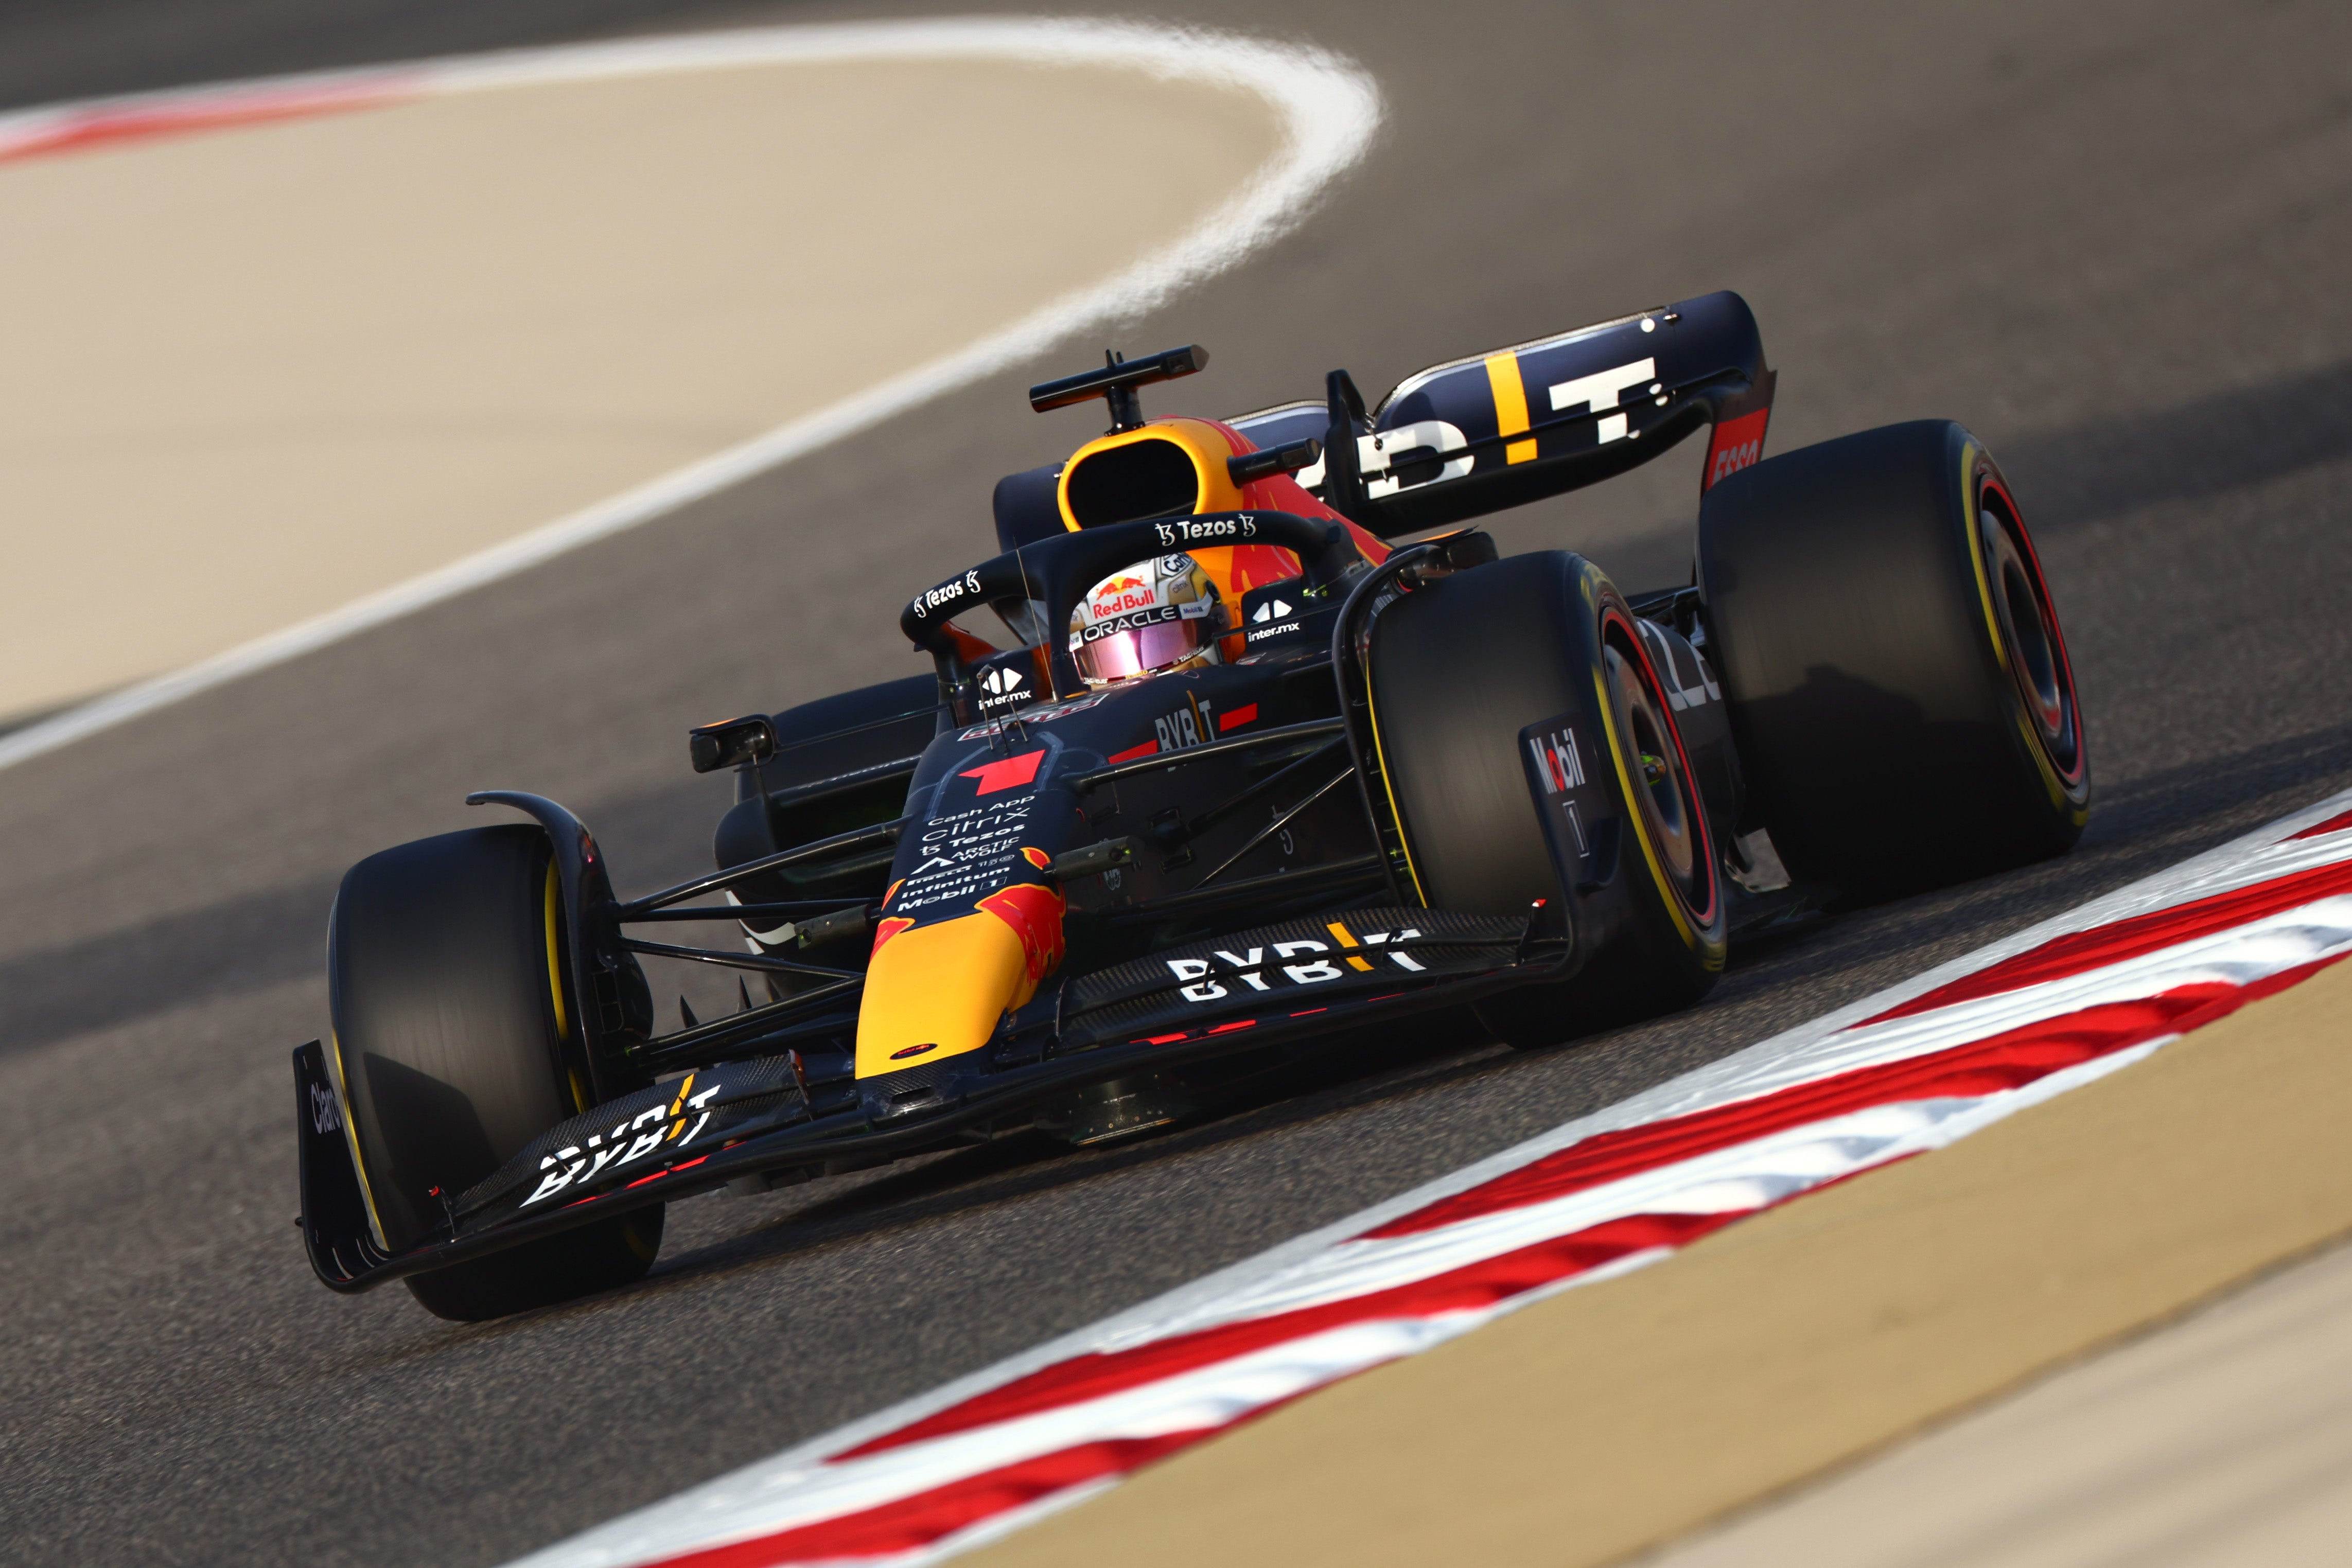 Pre-season testing takes place in Bahrain from 23-25 February